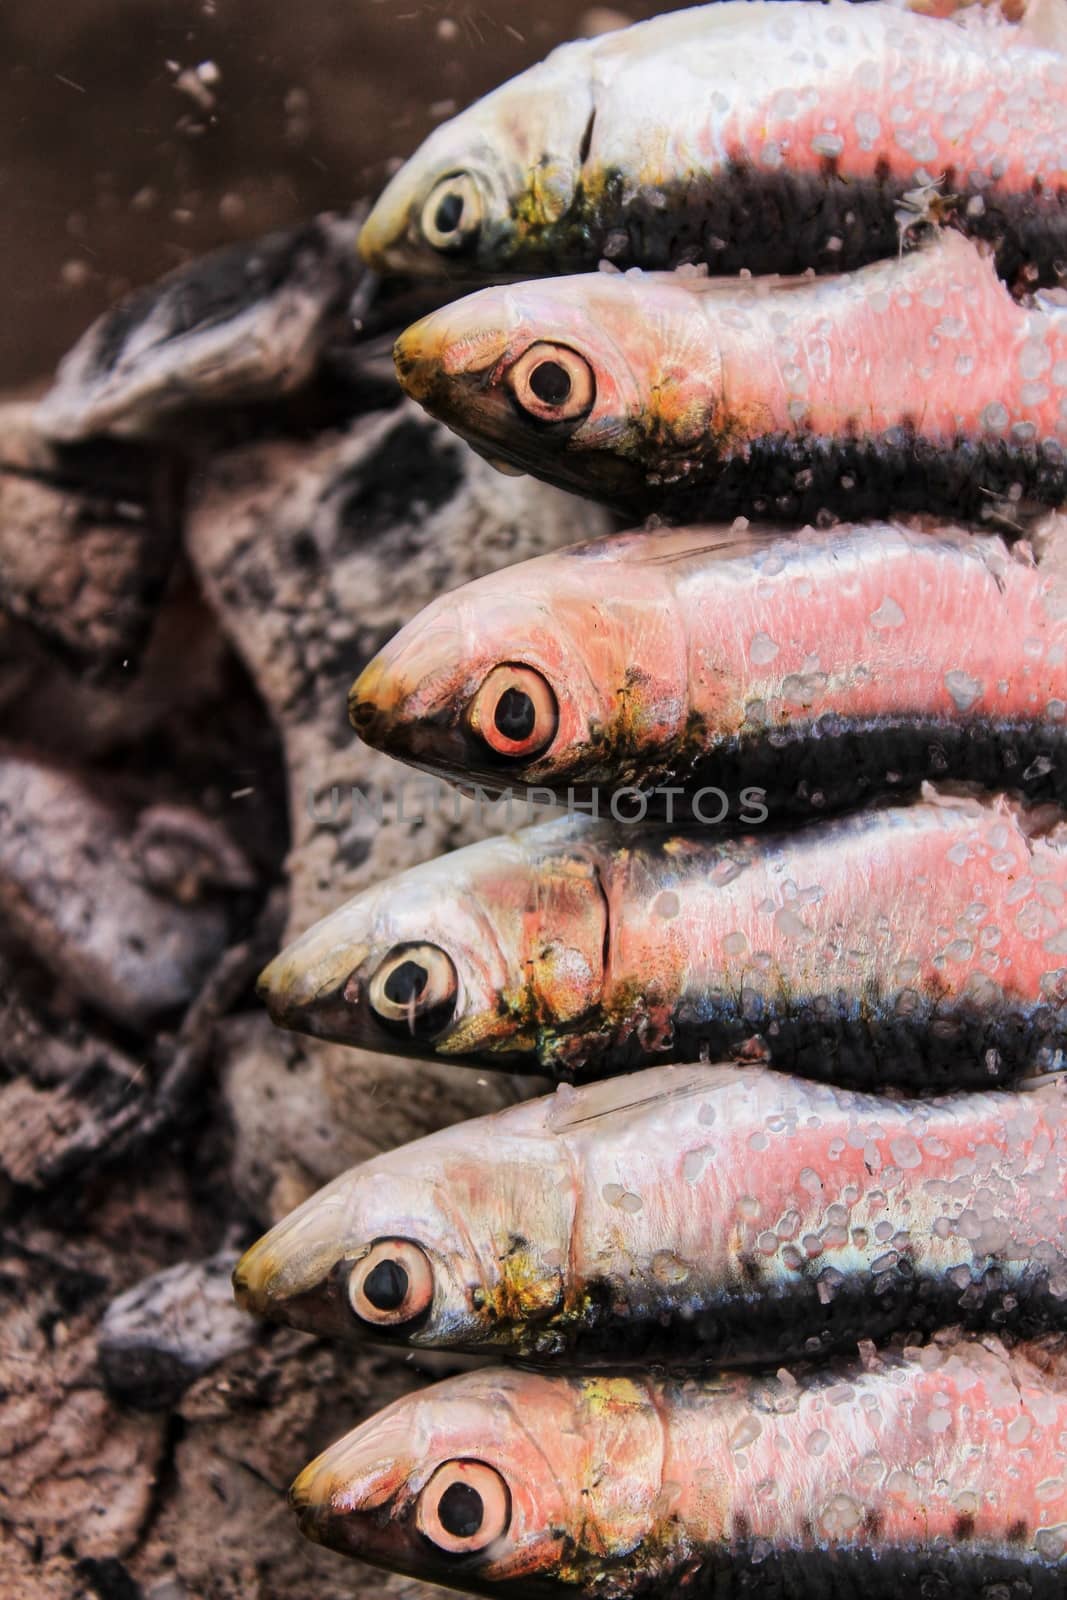 Roasted sardines on a spit in southern Spain in summer